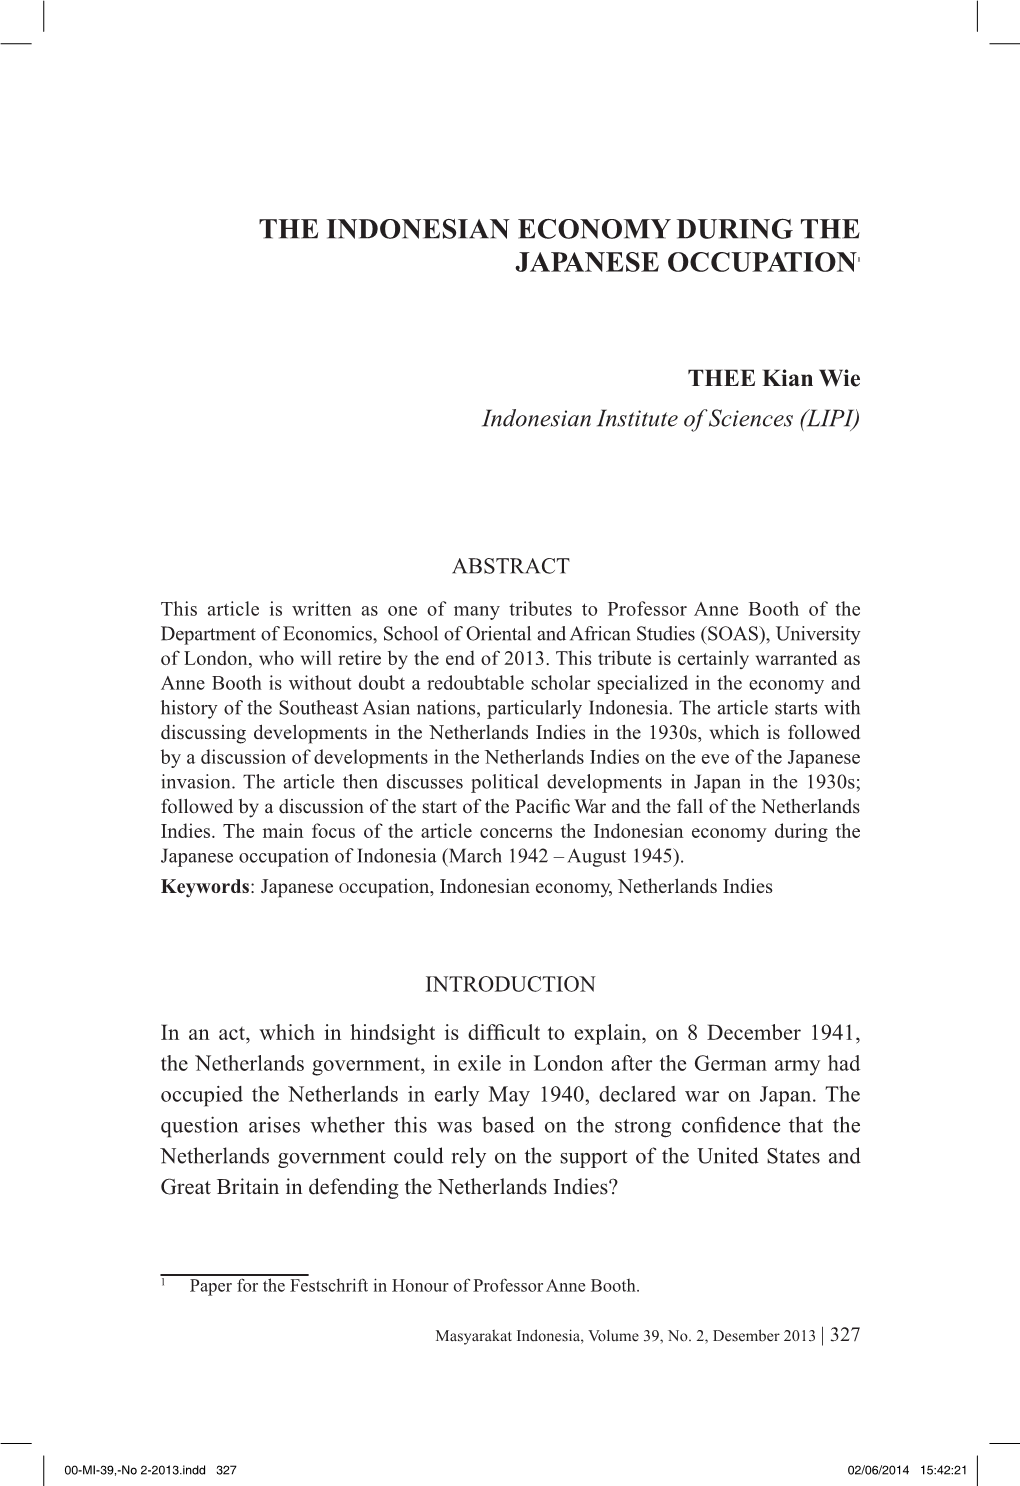 The Indonesian Economy During the Japanese Occupation1